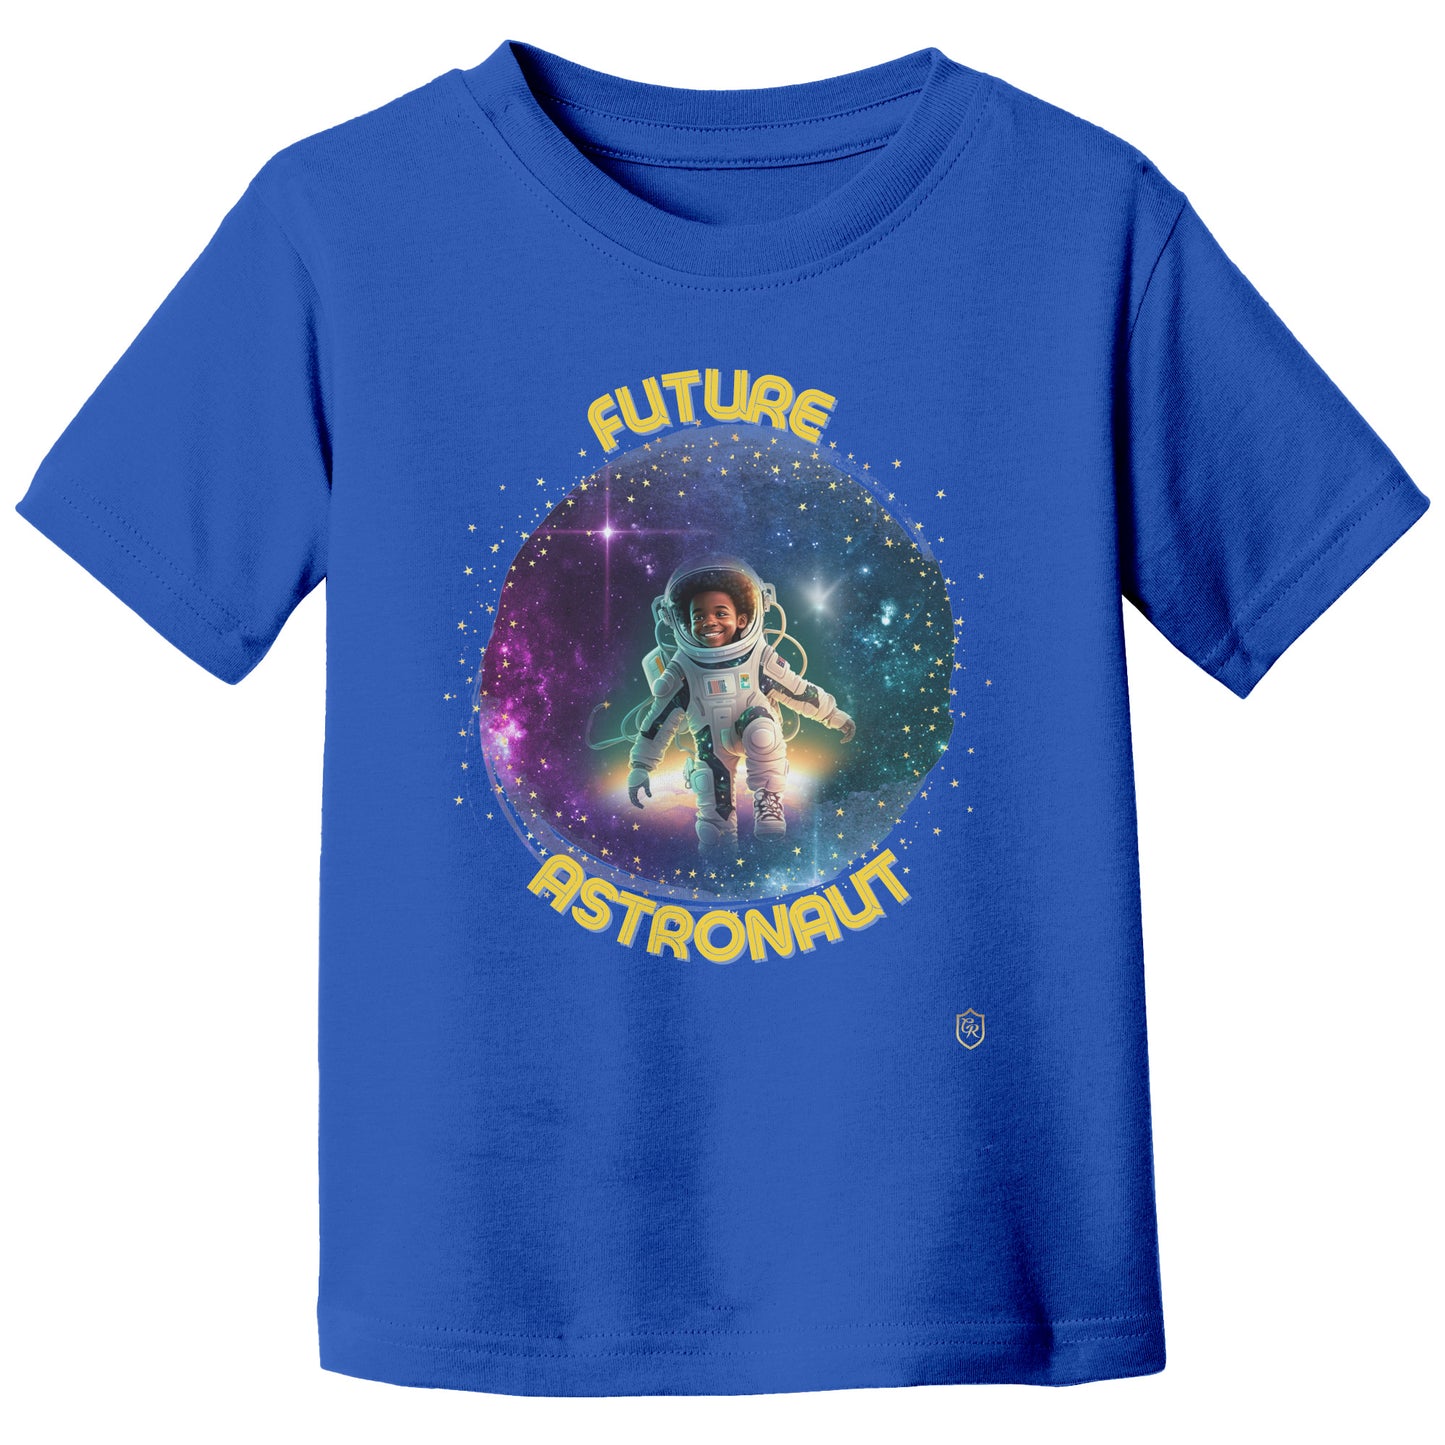 Boy's Galactic Explorer T-shirt: The Official Astronaut Gear of the Future